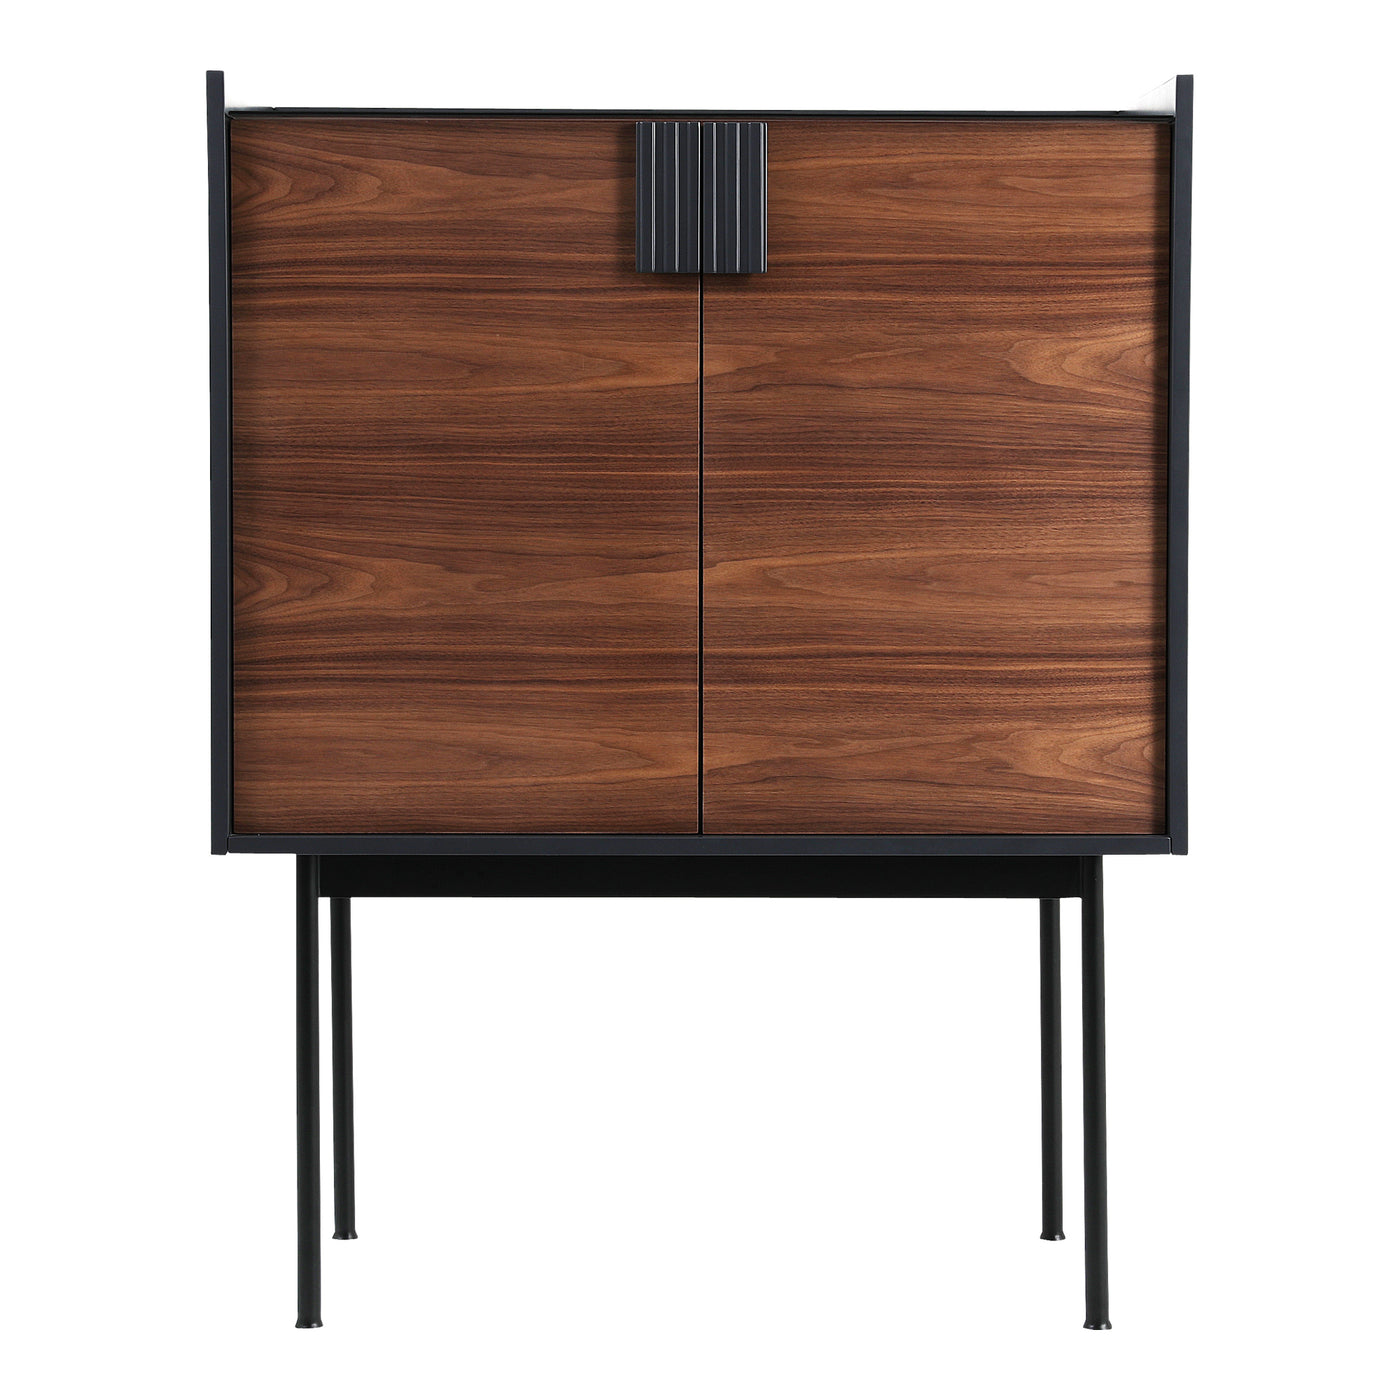 Make the perfect cocktail atop the Yasmin Bar Cabinet. A two-door storage compartment reveals shelving for bottles and gla...